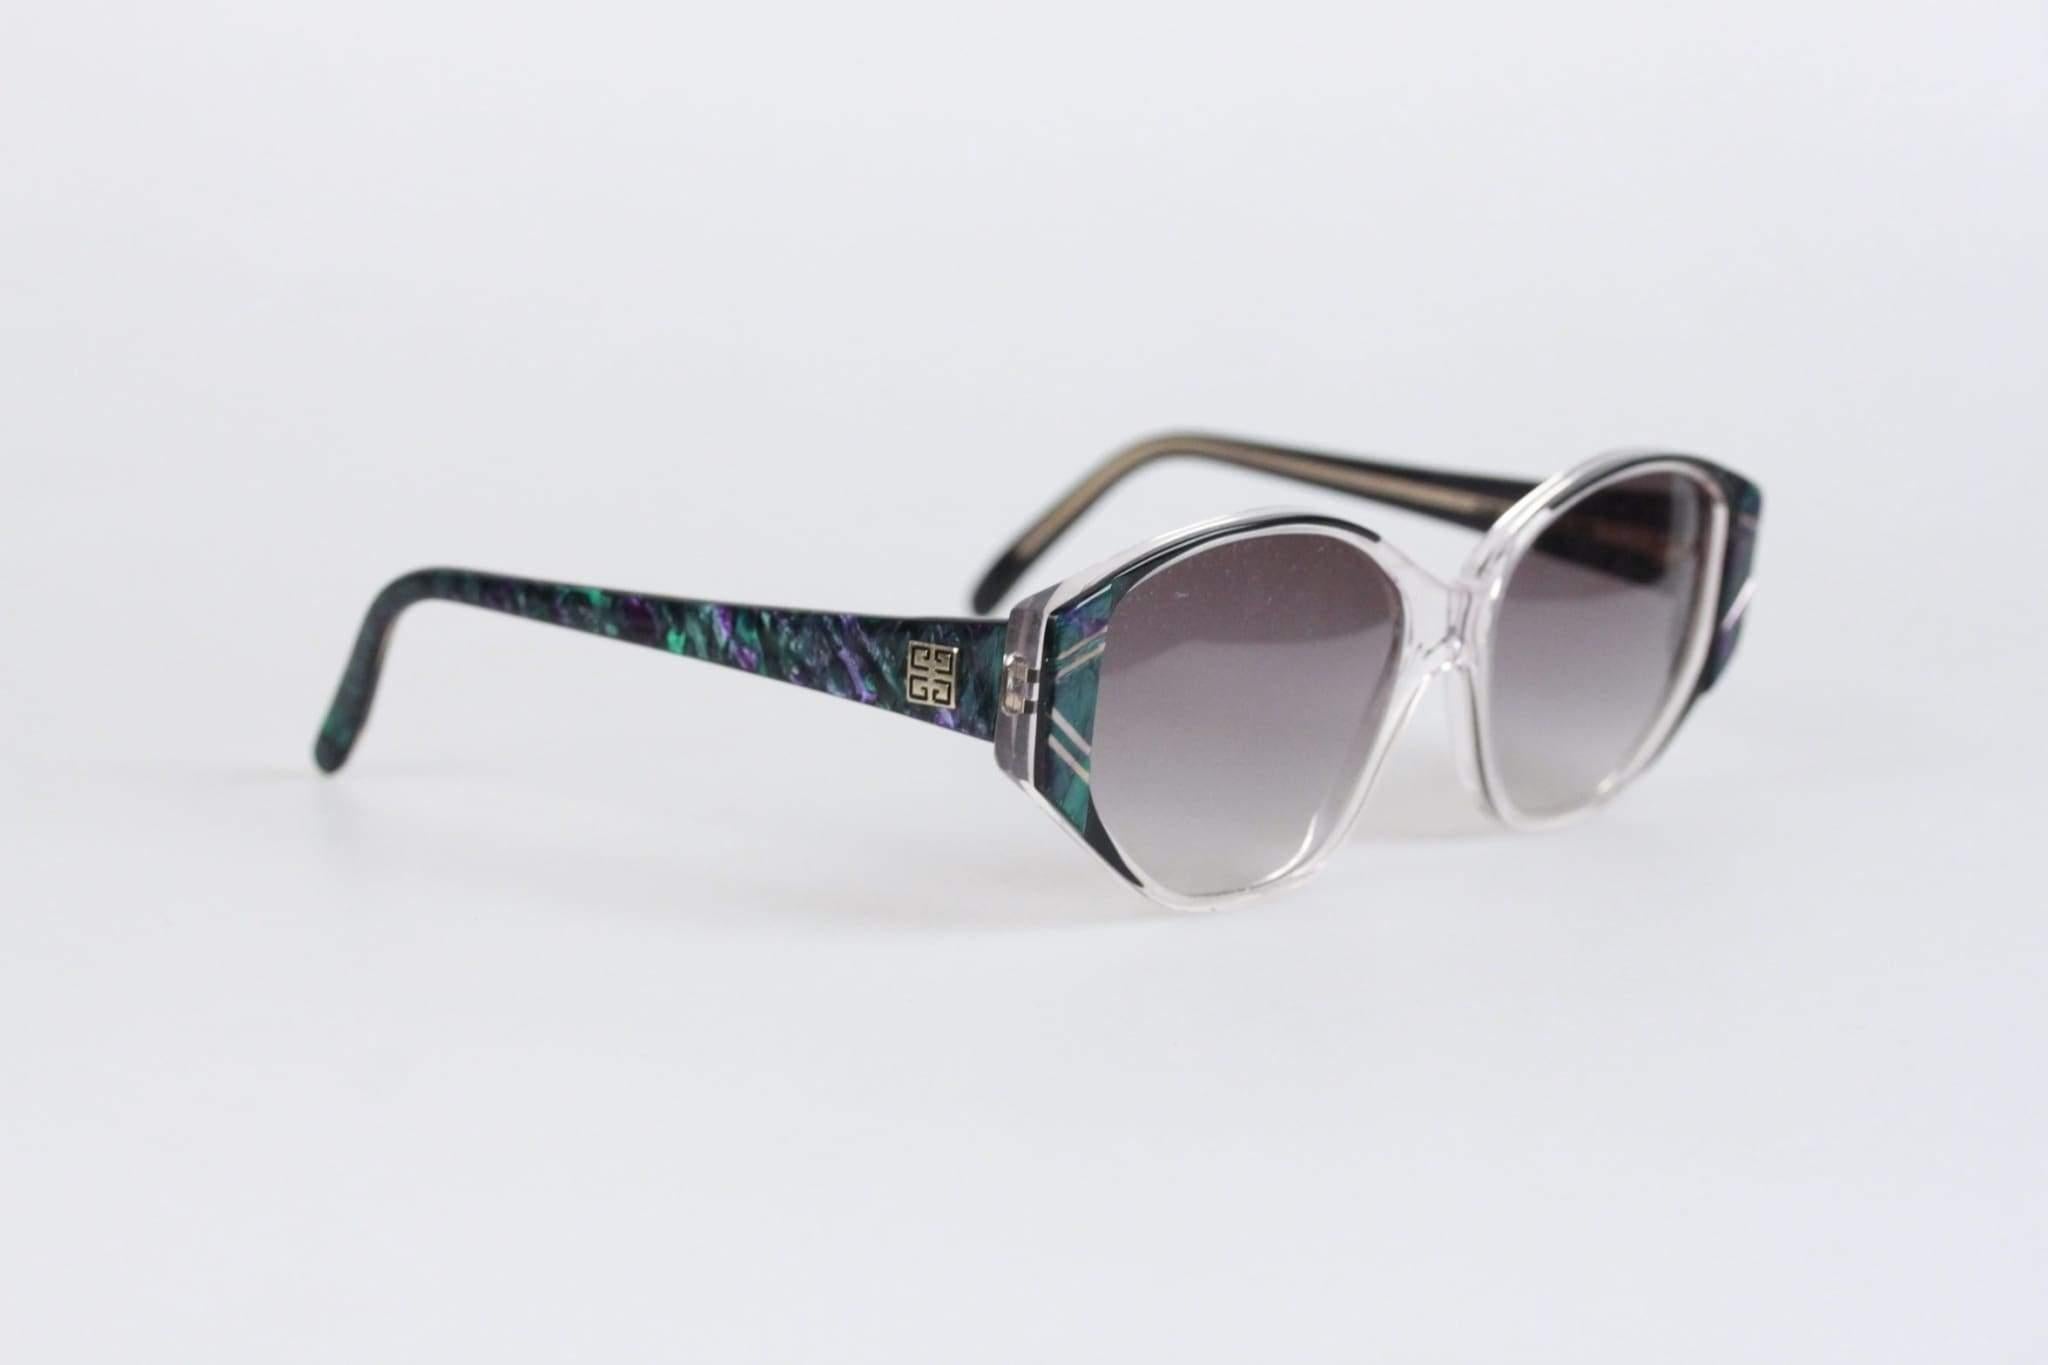 MATERIAL: Acetate COLOR: Green, Purple LENS COLOR: Grey MODEL: G8915 -009- 54/15 GENDER: Womens SIZE: Medium CONDITION DETAILS: NOS - New Old Stock - Never worn or used - It will come with a Generic Case MEASUREMENTS: TEMPLE MAX. LENGTH: 130 mm